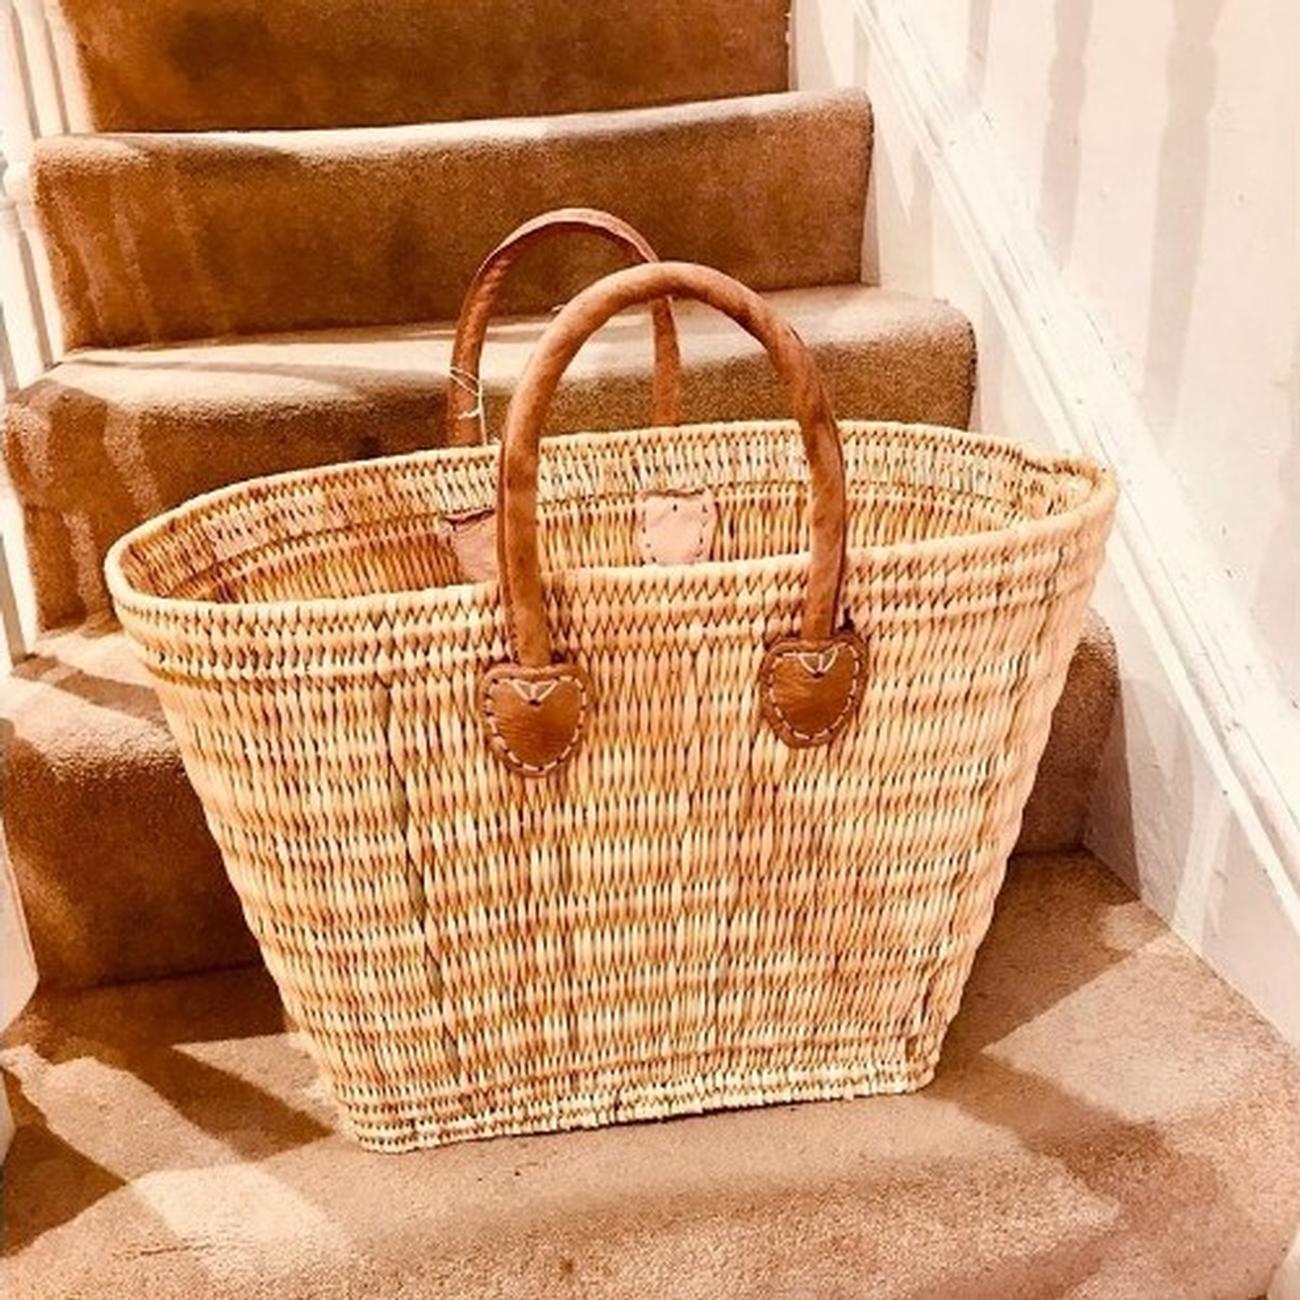 basket-with-short-handles-small - Basket with Short Handles